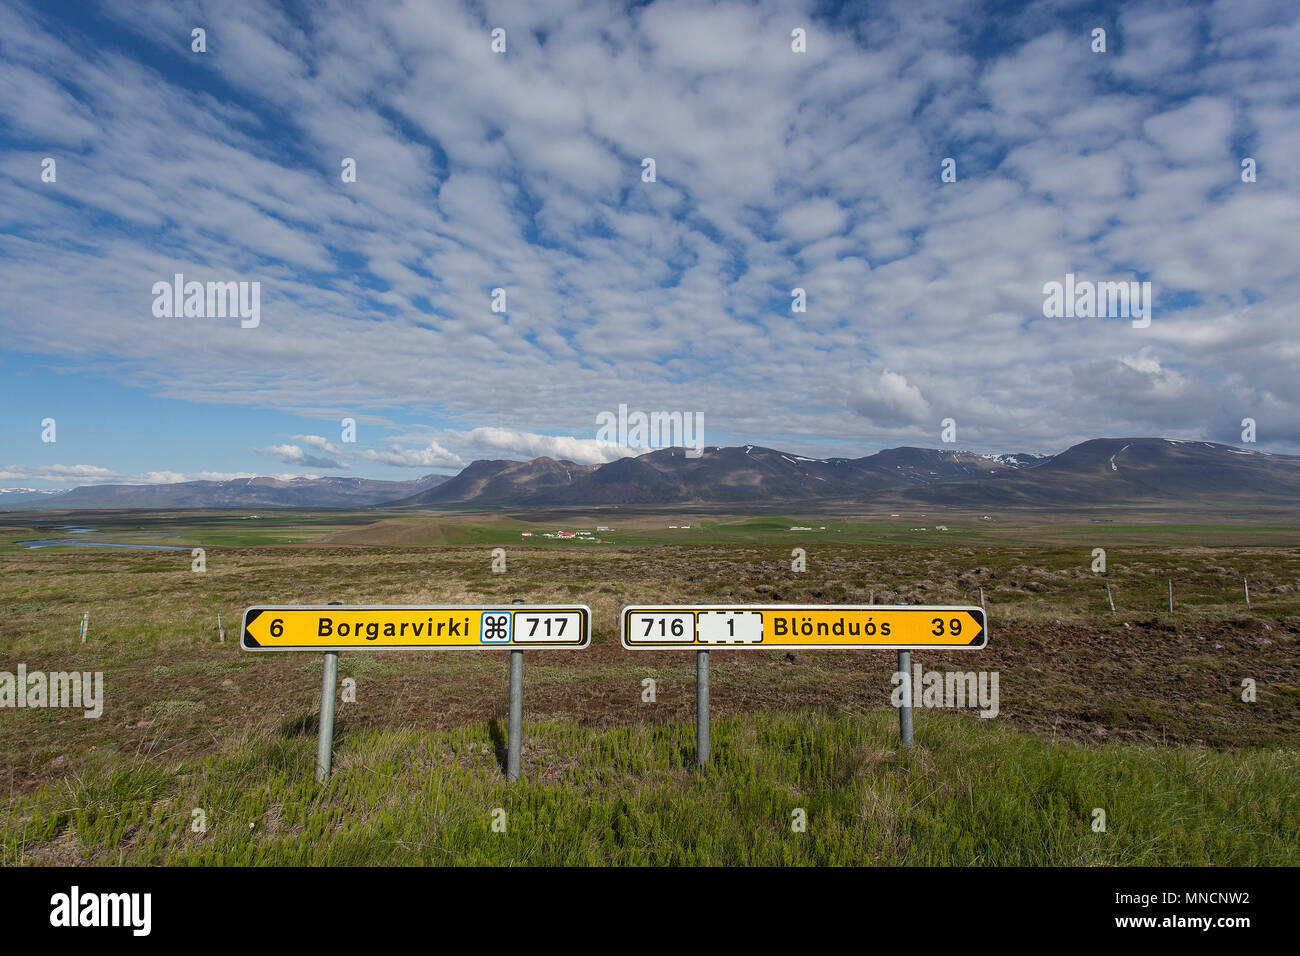 Two signposts along the road near Borggarvirki, wide landscape with cloud formation, Vatnsnes Peninsula, North Iceland, Iceland Stock Photo